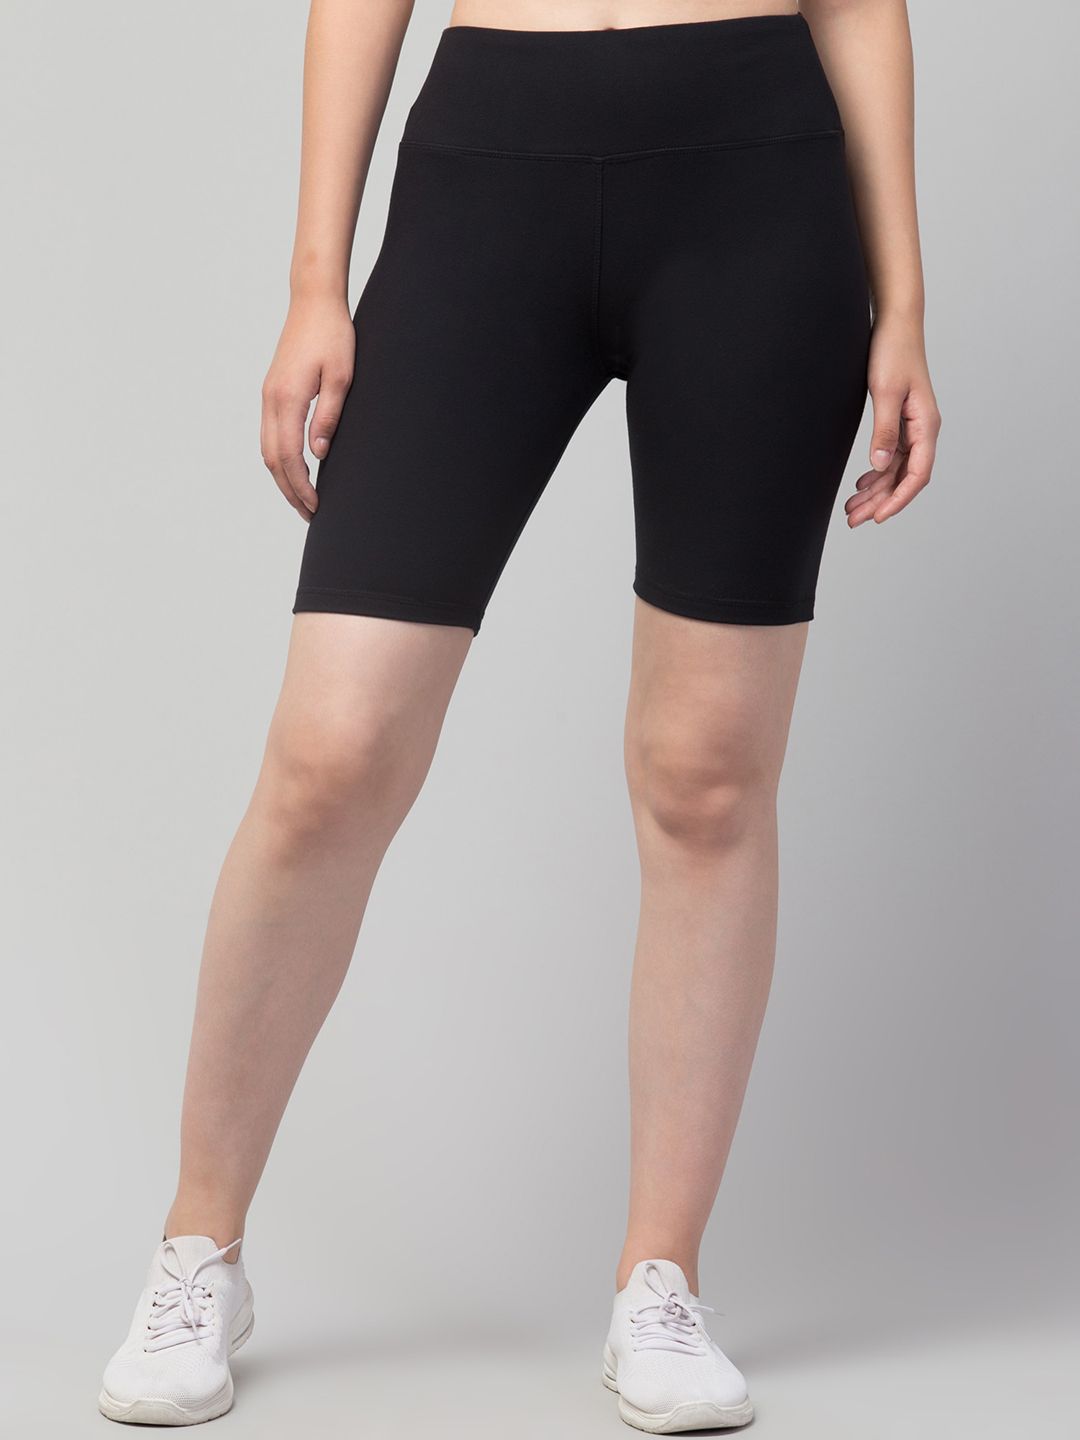 Apraa & Parma Women Black Skinny Fit Cycling Sports Shorts Price in India